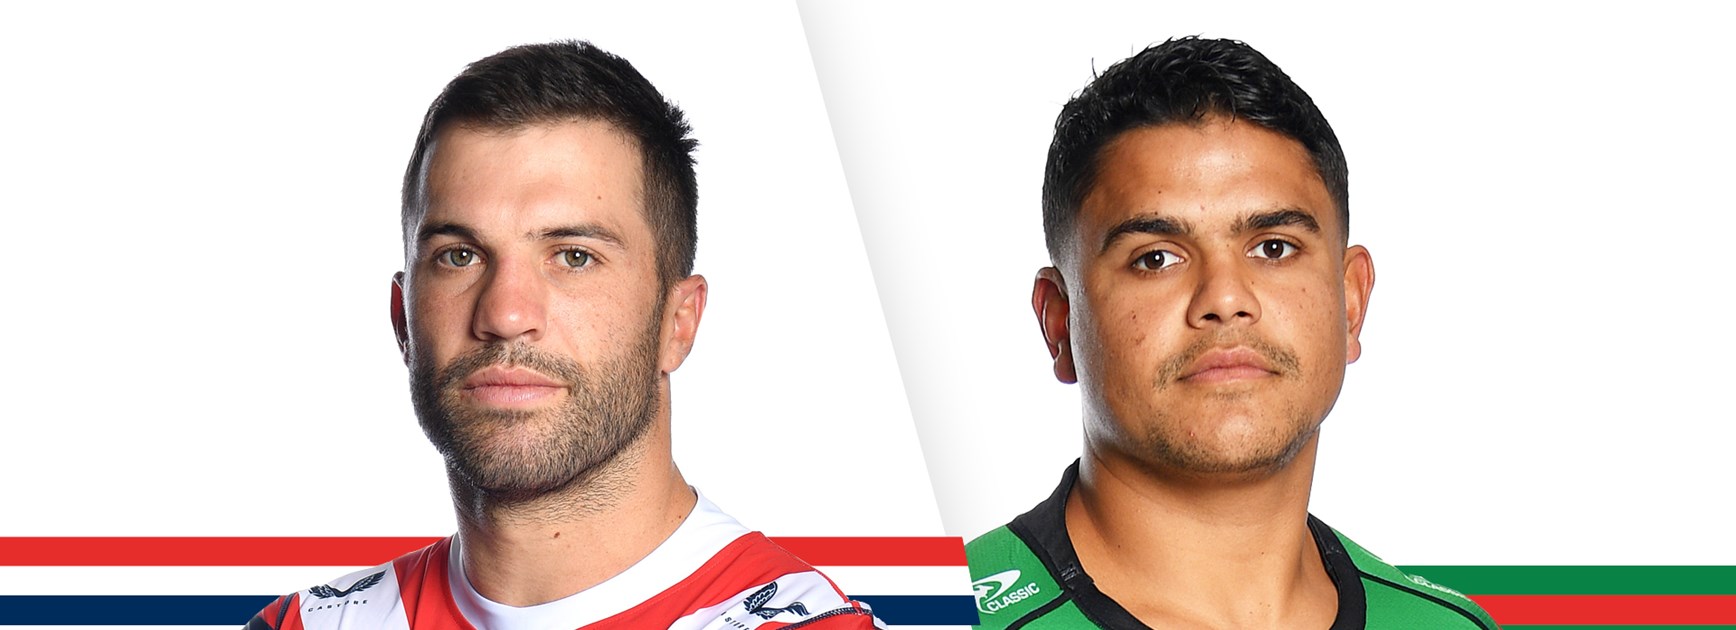 The Roosters Crow: Foundation Rivalry Returns